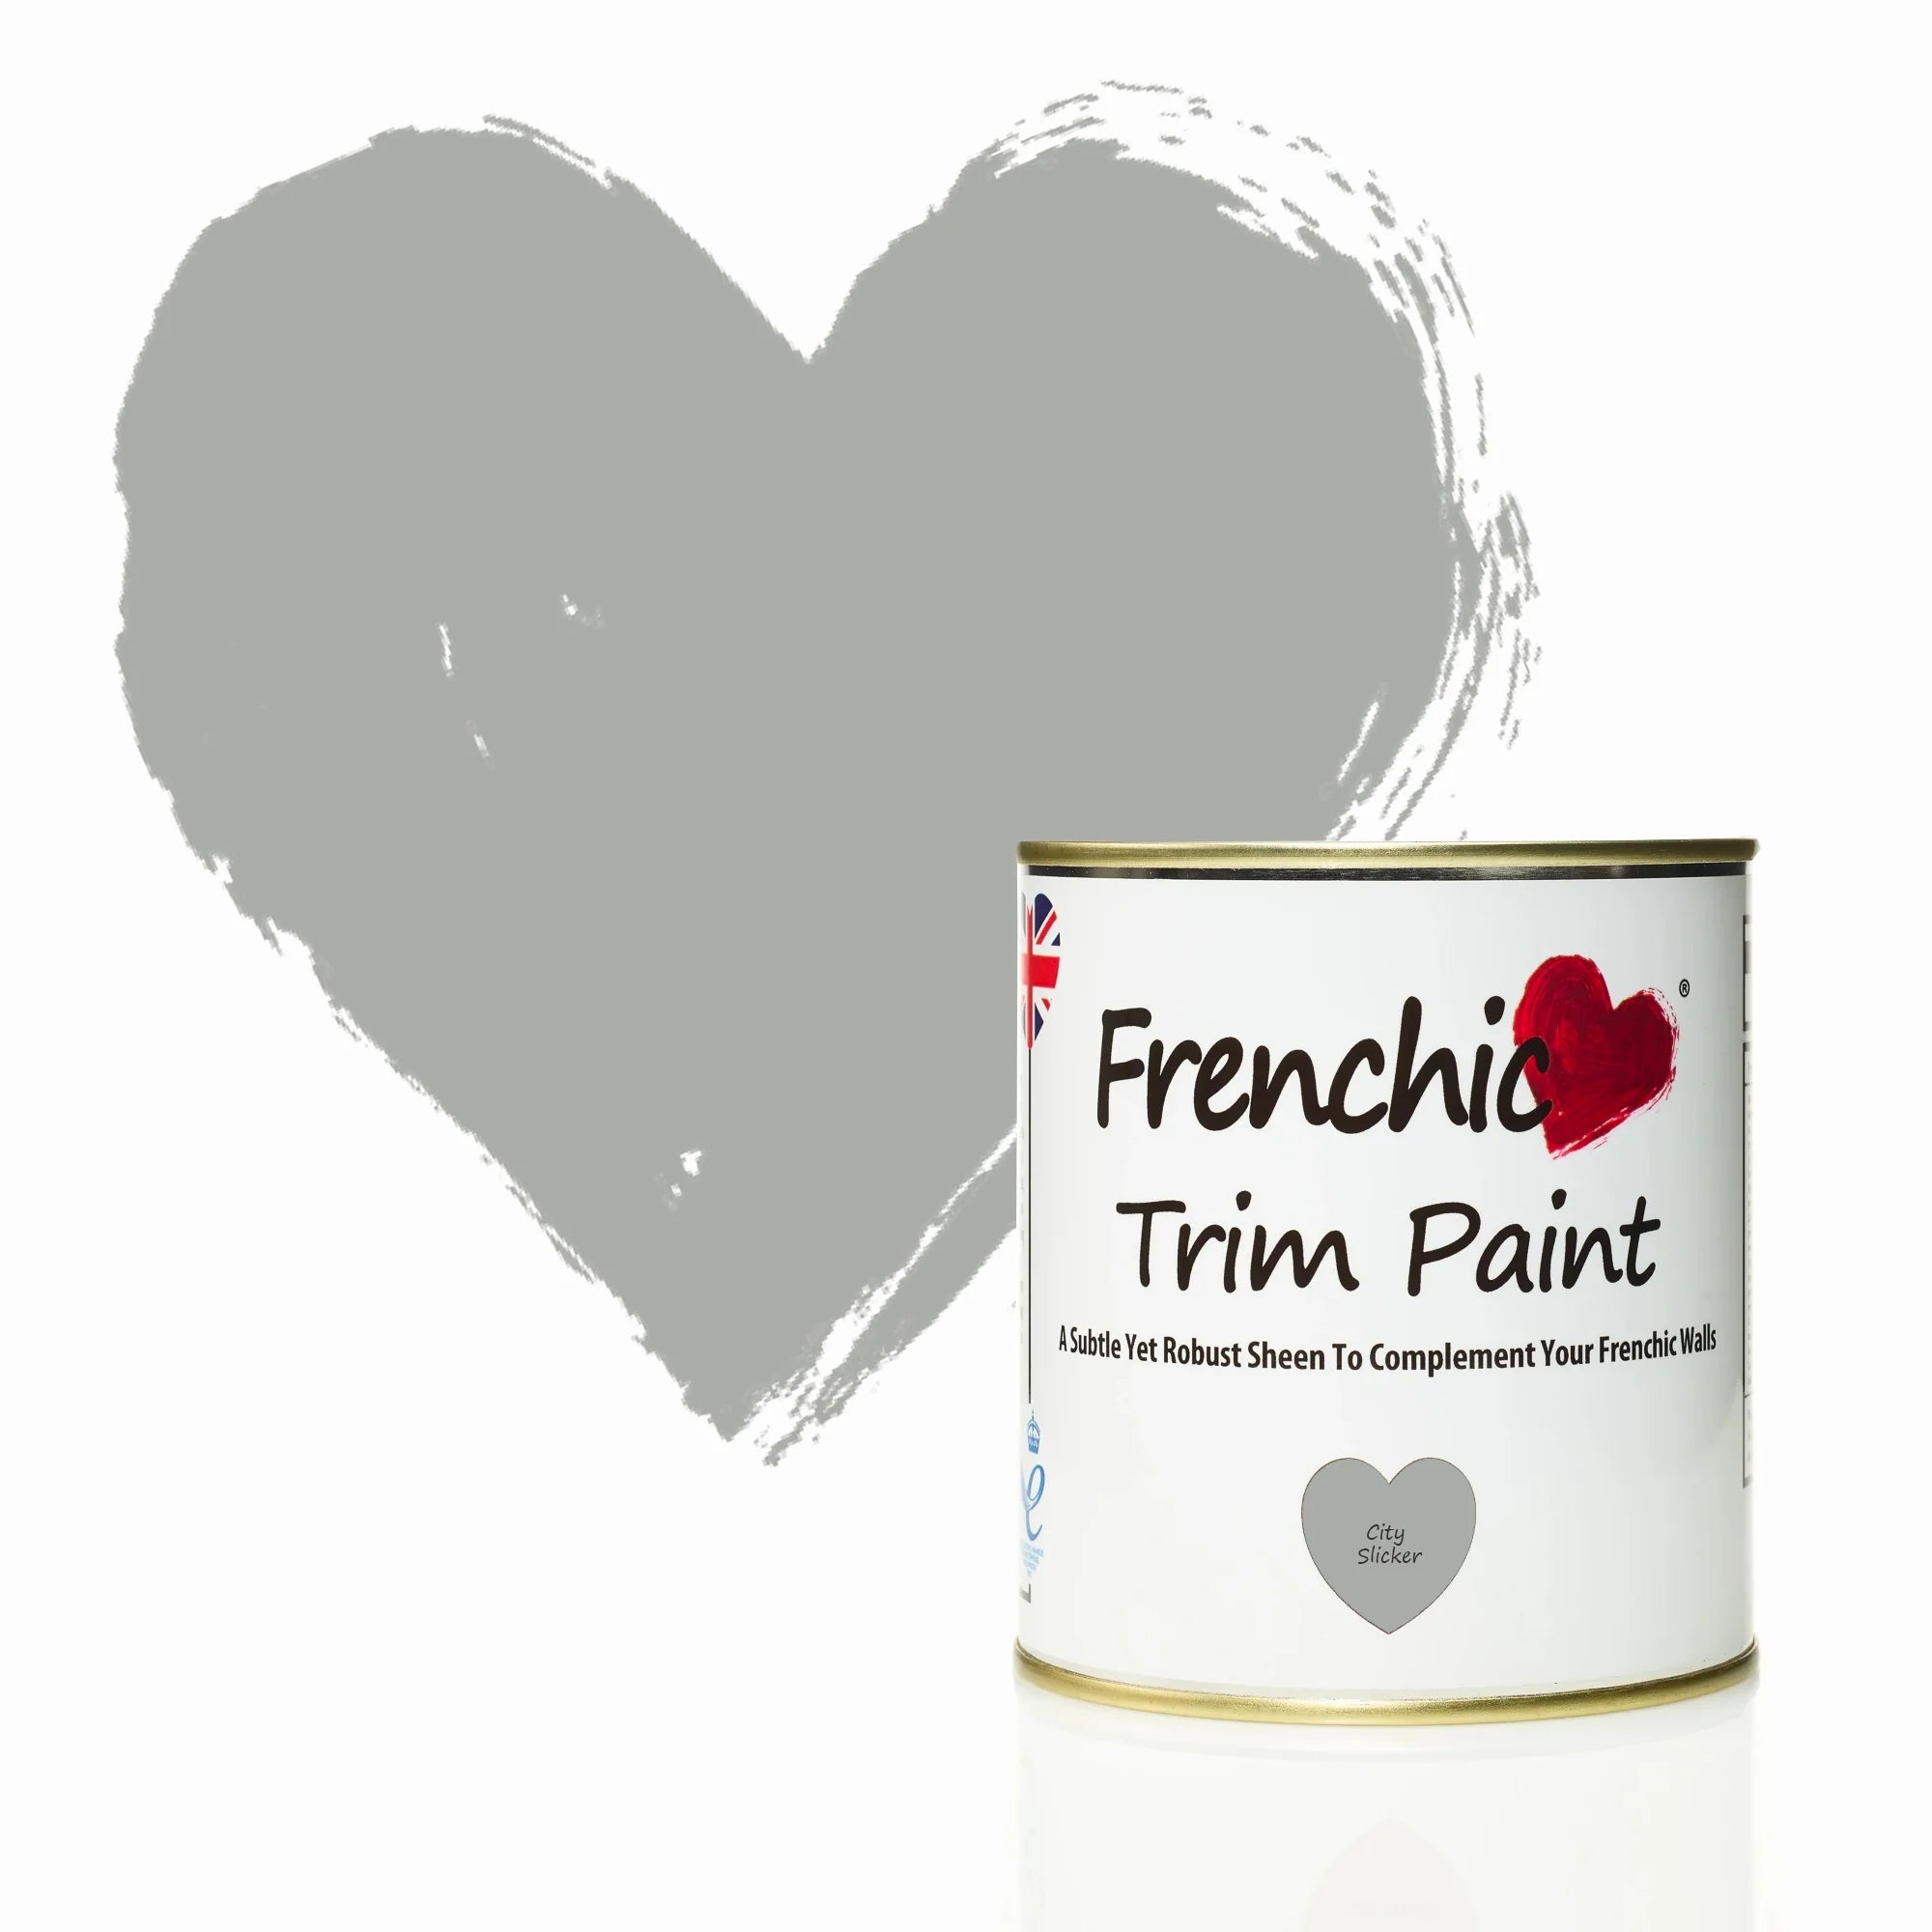 Frenchic Paint City Slicker Trim Paint Frenchic Paint Trim Paint Range by Weirs of Baggot Street Irelands Largest and most Trusted Stockist of Frenchic Paint. Shop online for Nationwide and Same Day Dublin Delivery